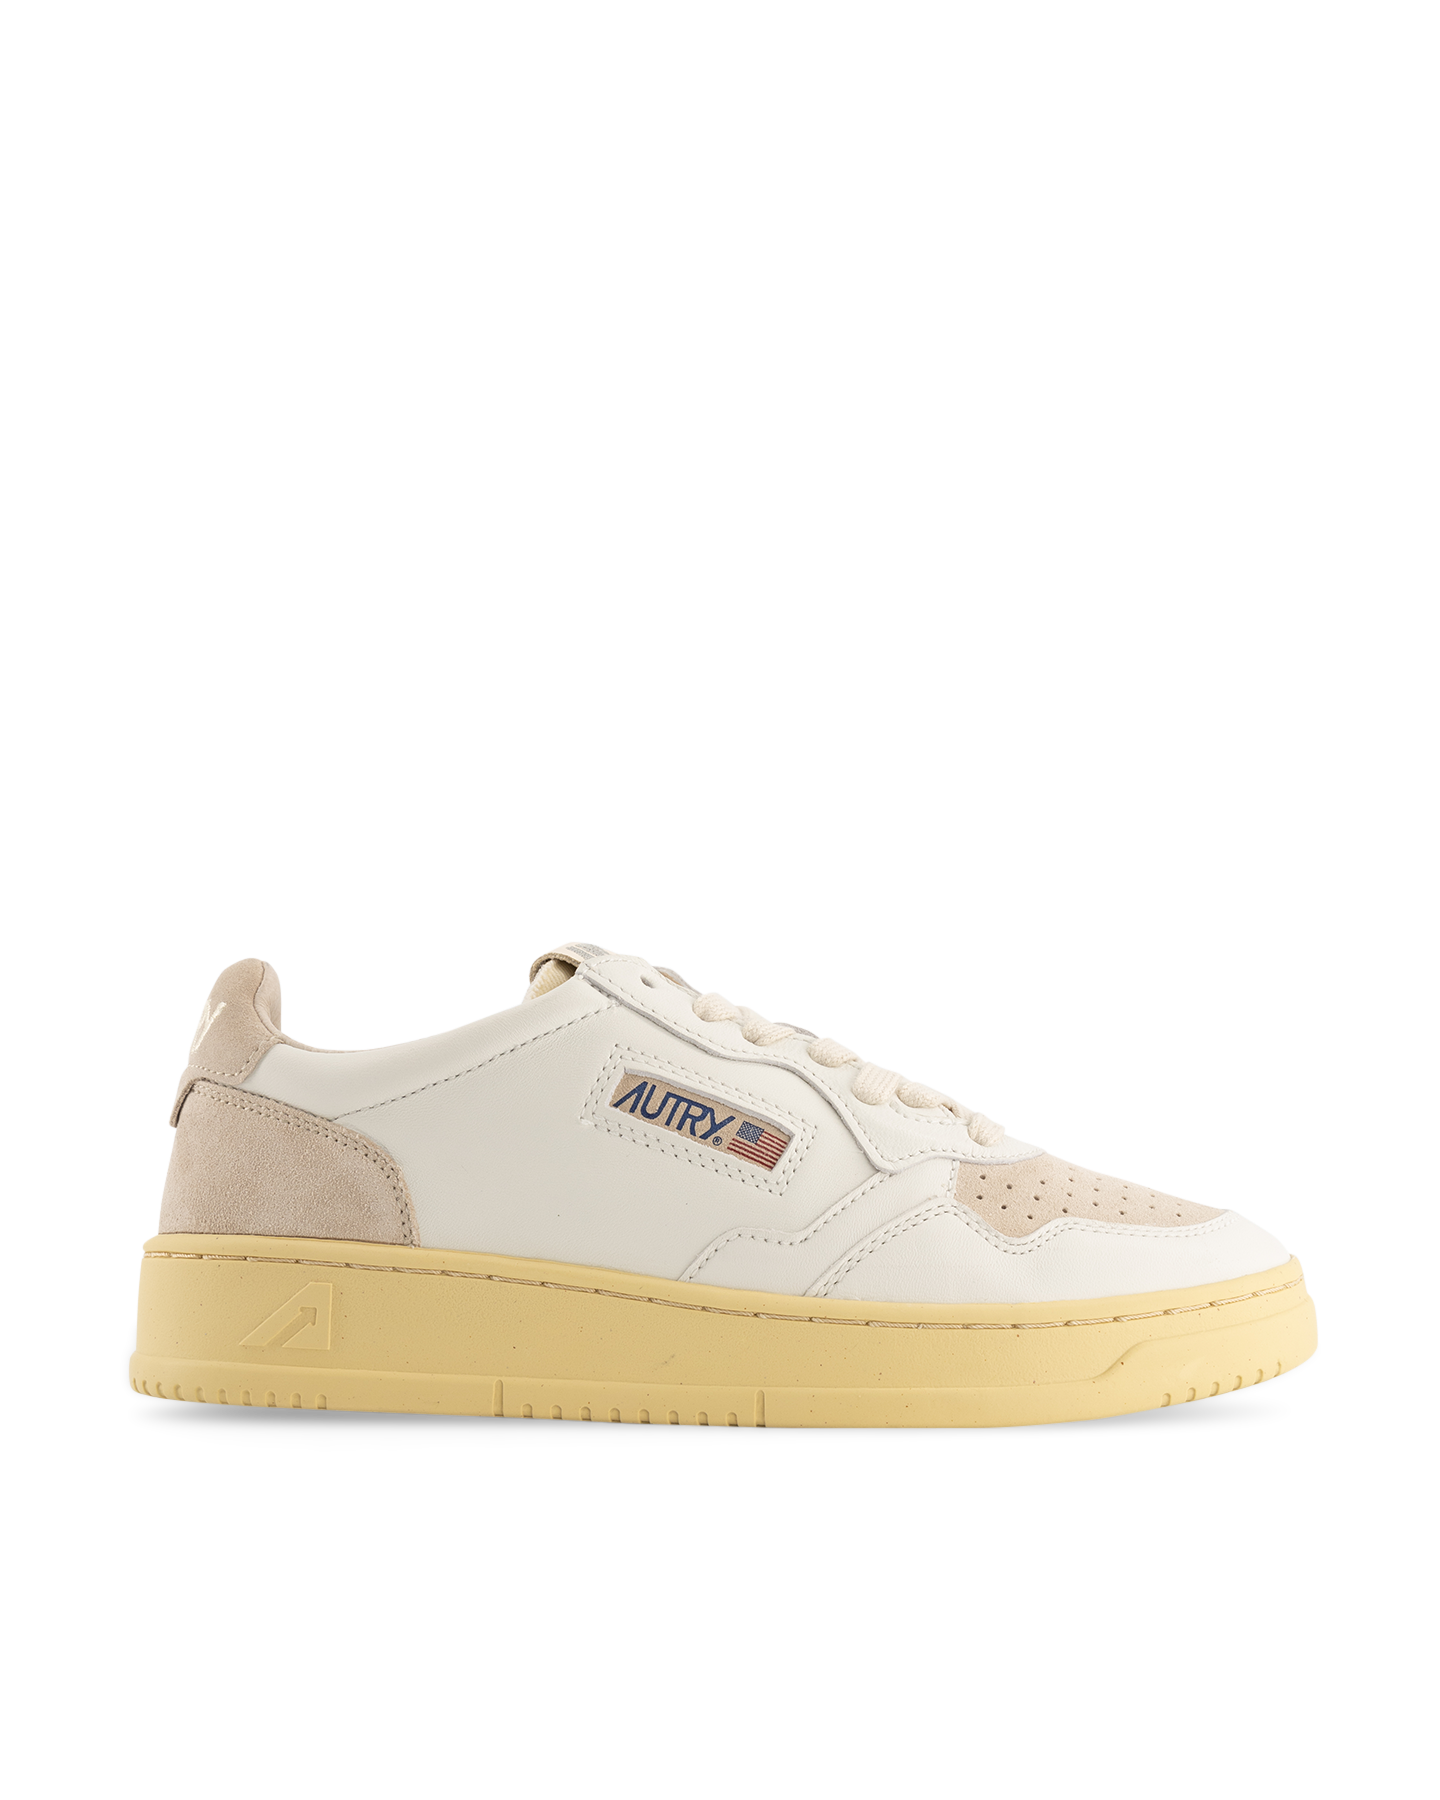 Autry Action Autry 01 Low Wom Suede/Leat Wht/Sand White 1